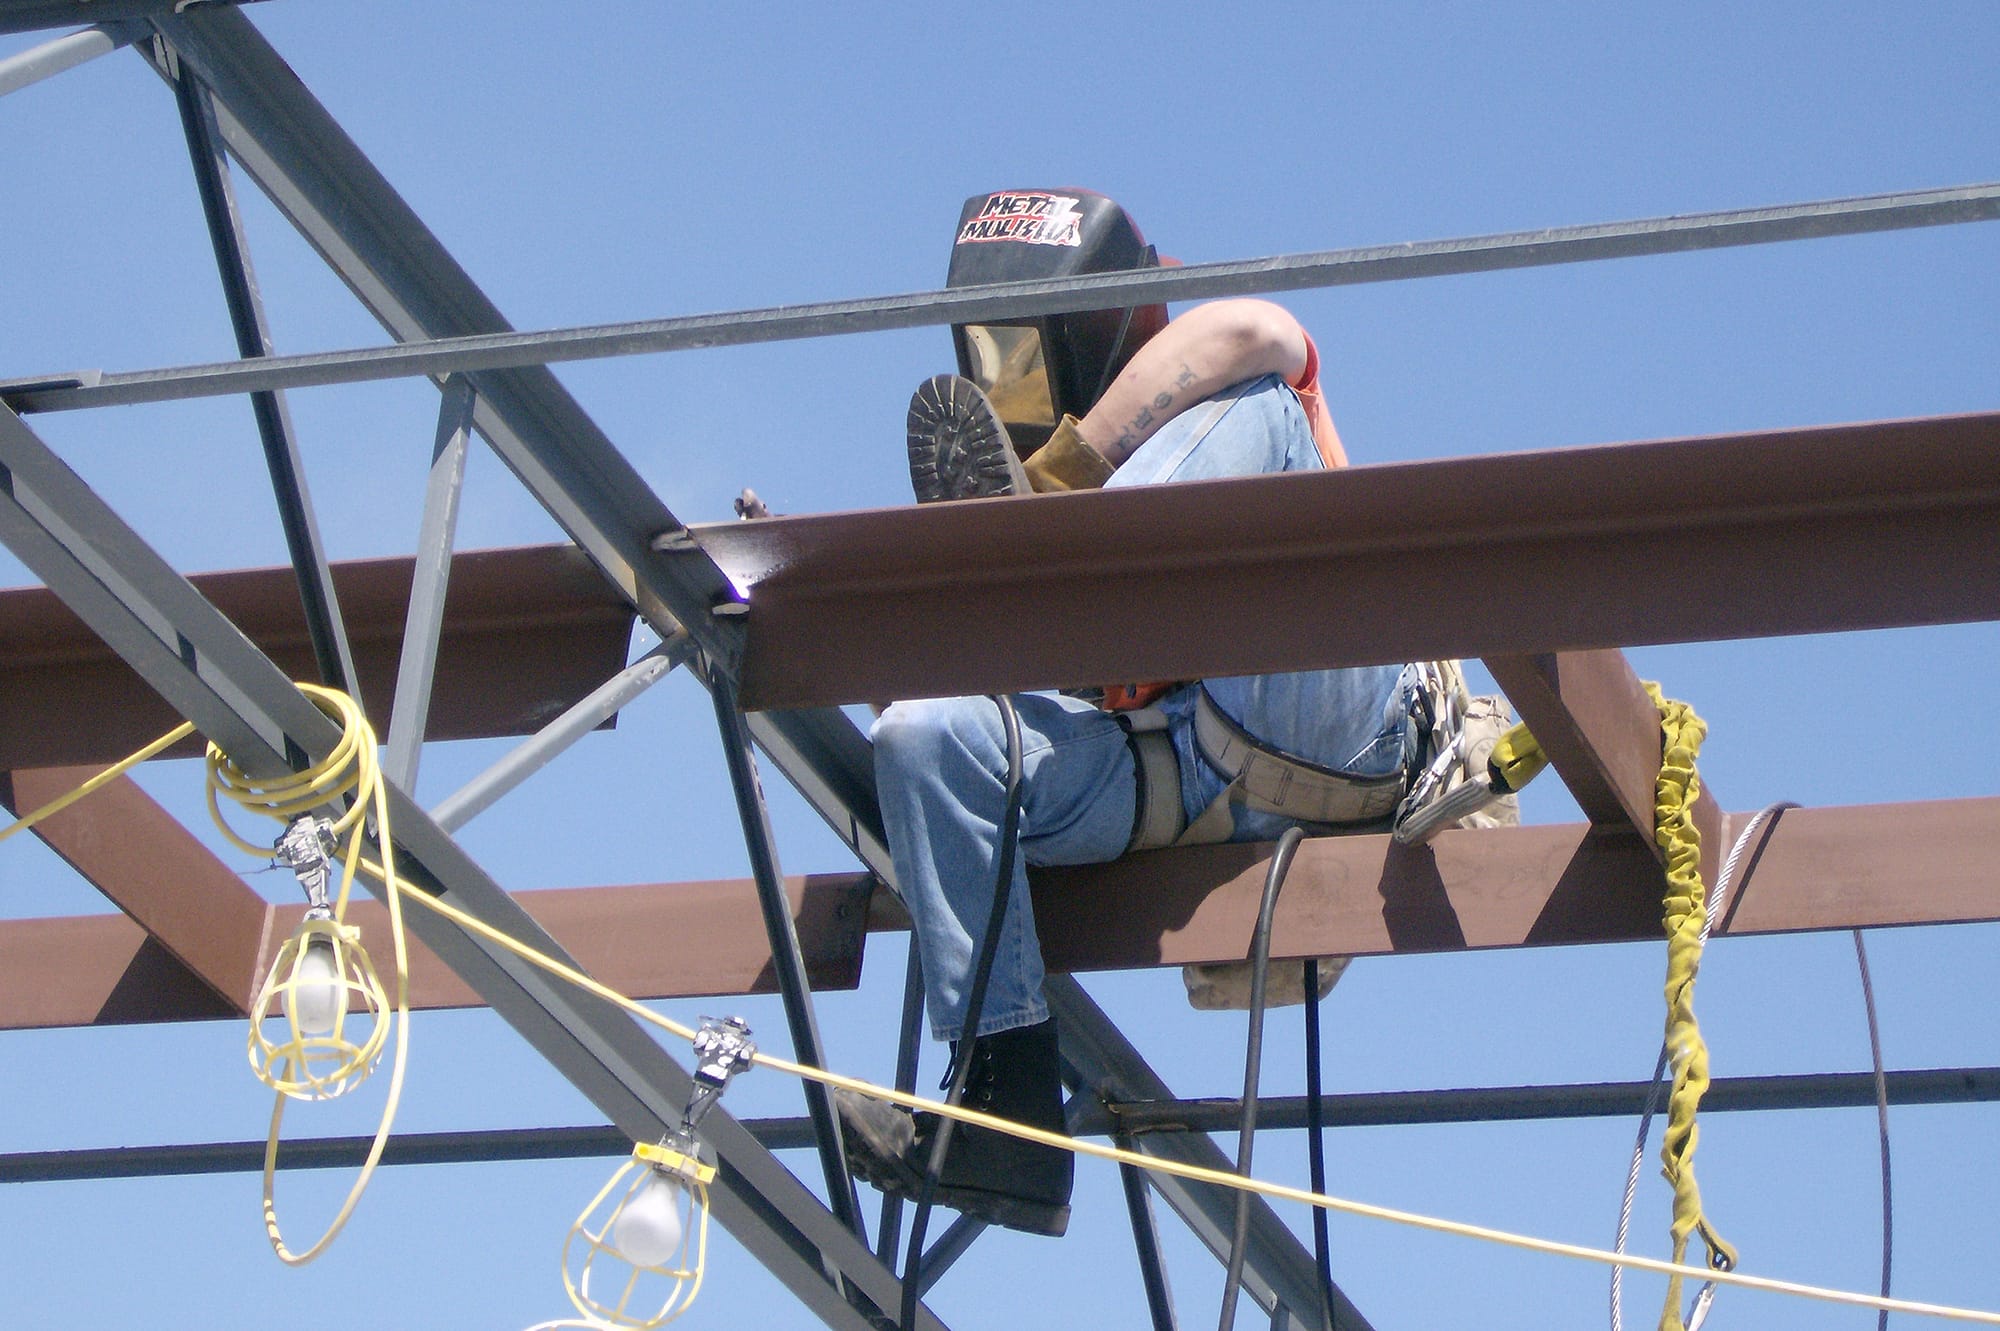 A Vancouver, Wa steel fabricator sits atop high metal beams in a safety harness with a safety mask on for welding.